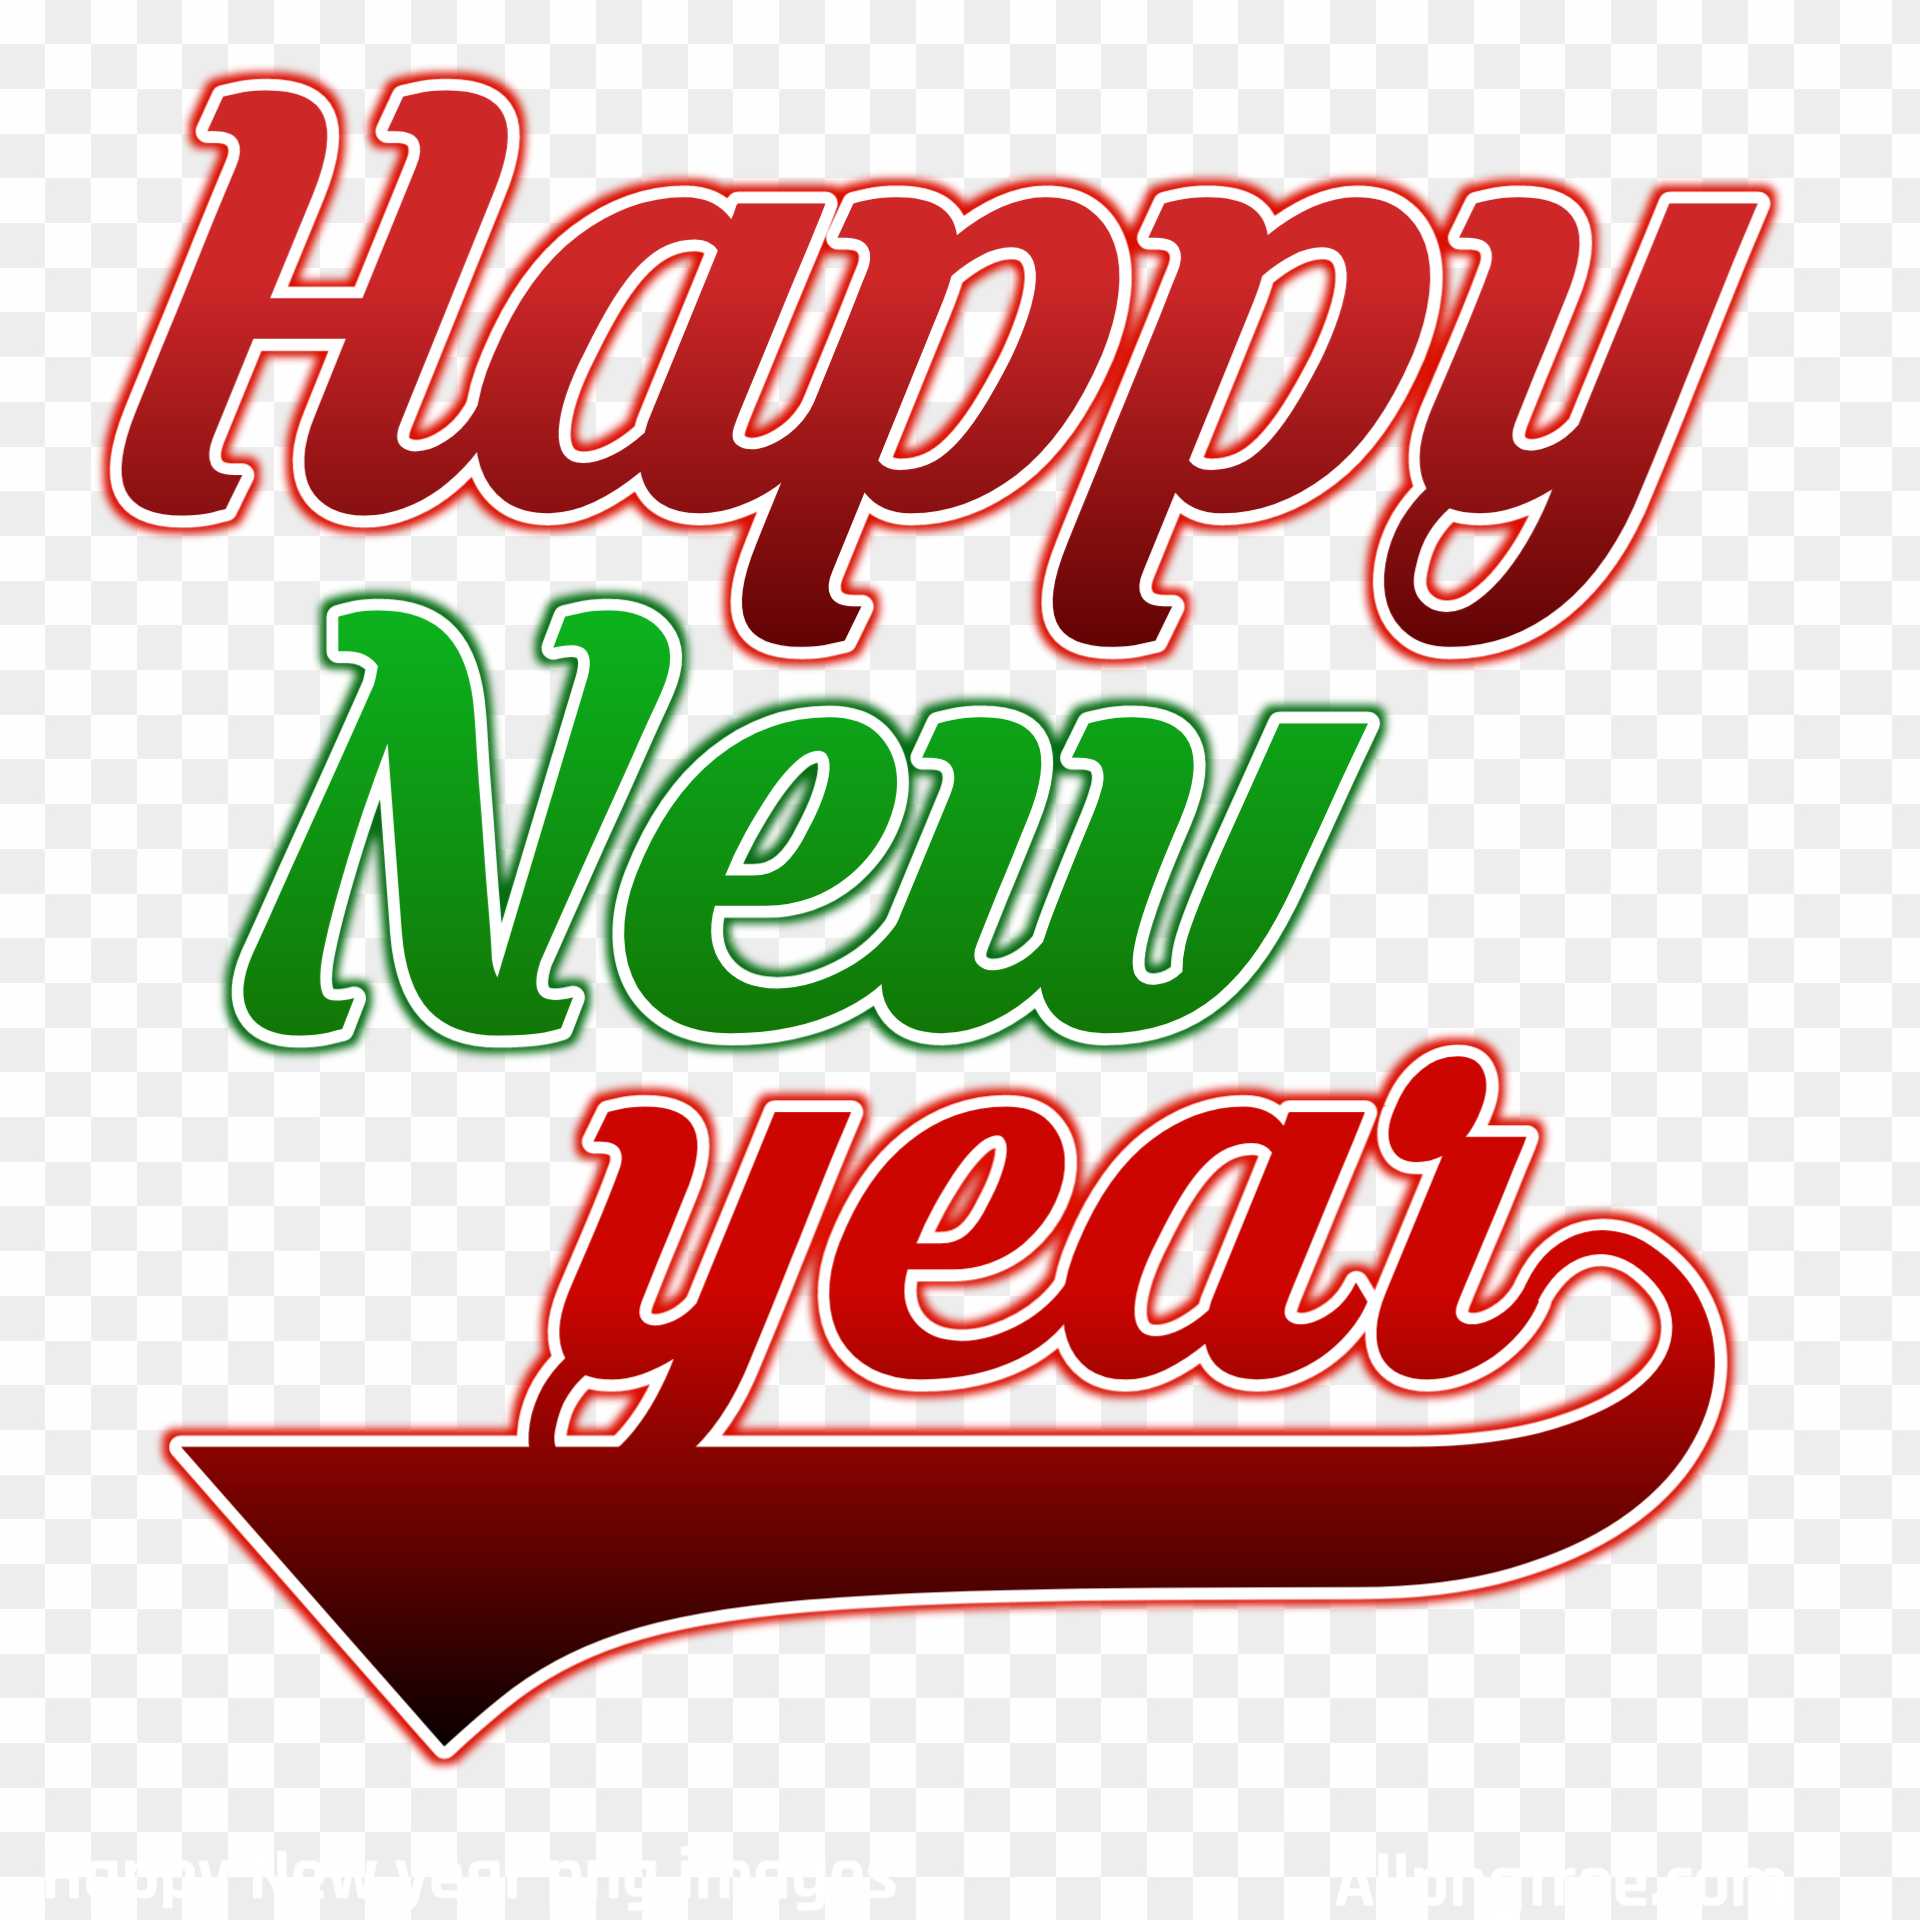 Happy New year png transparent image 